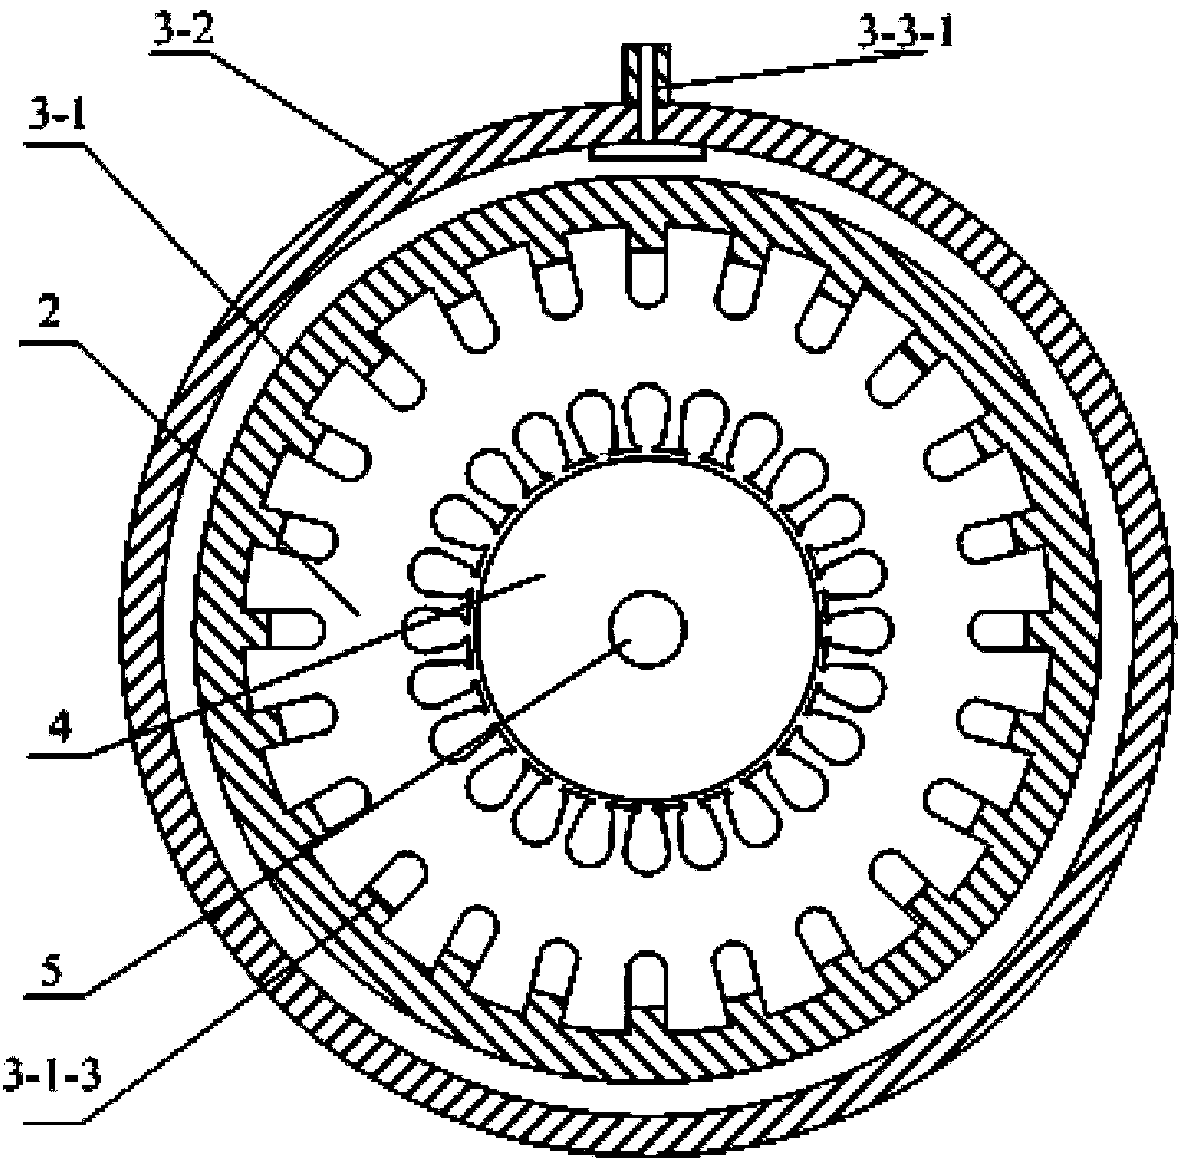 High-power density motor with water cooling structure